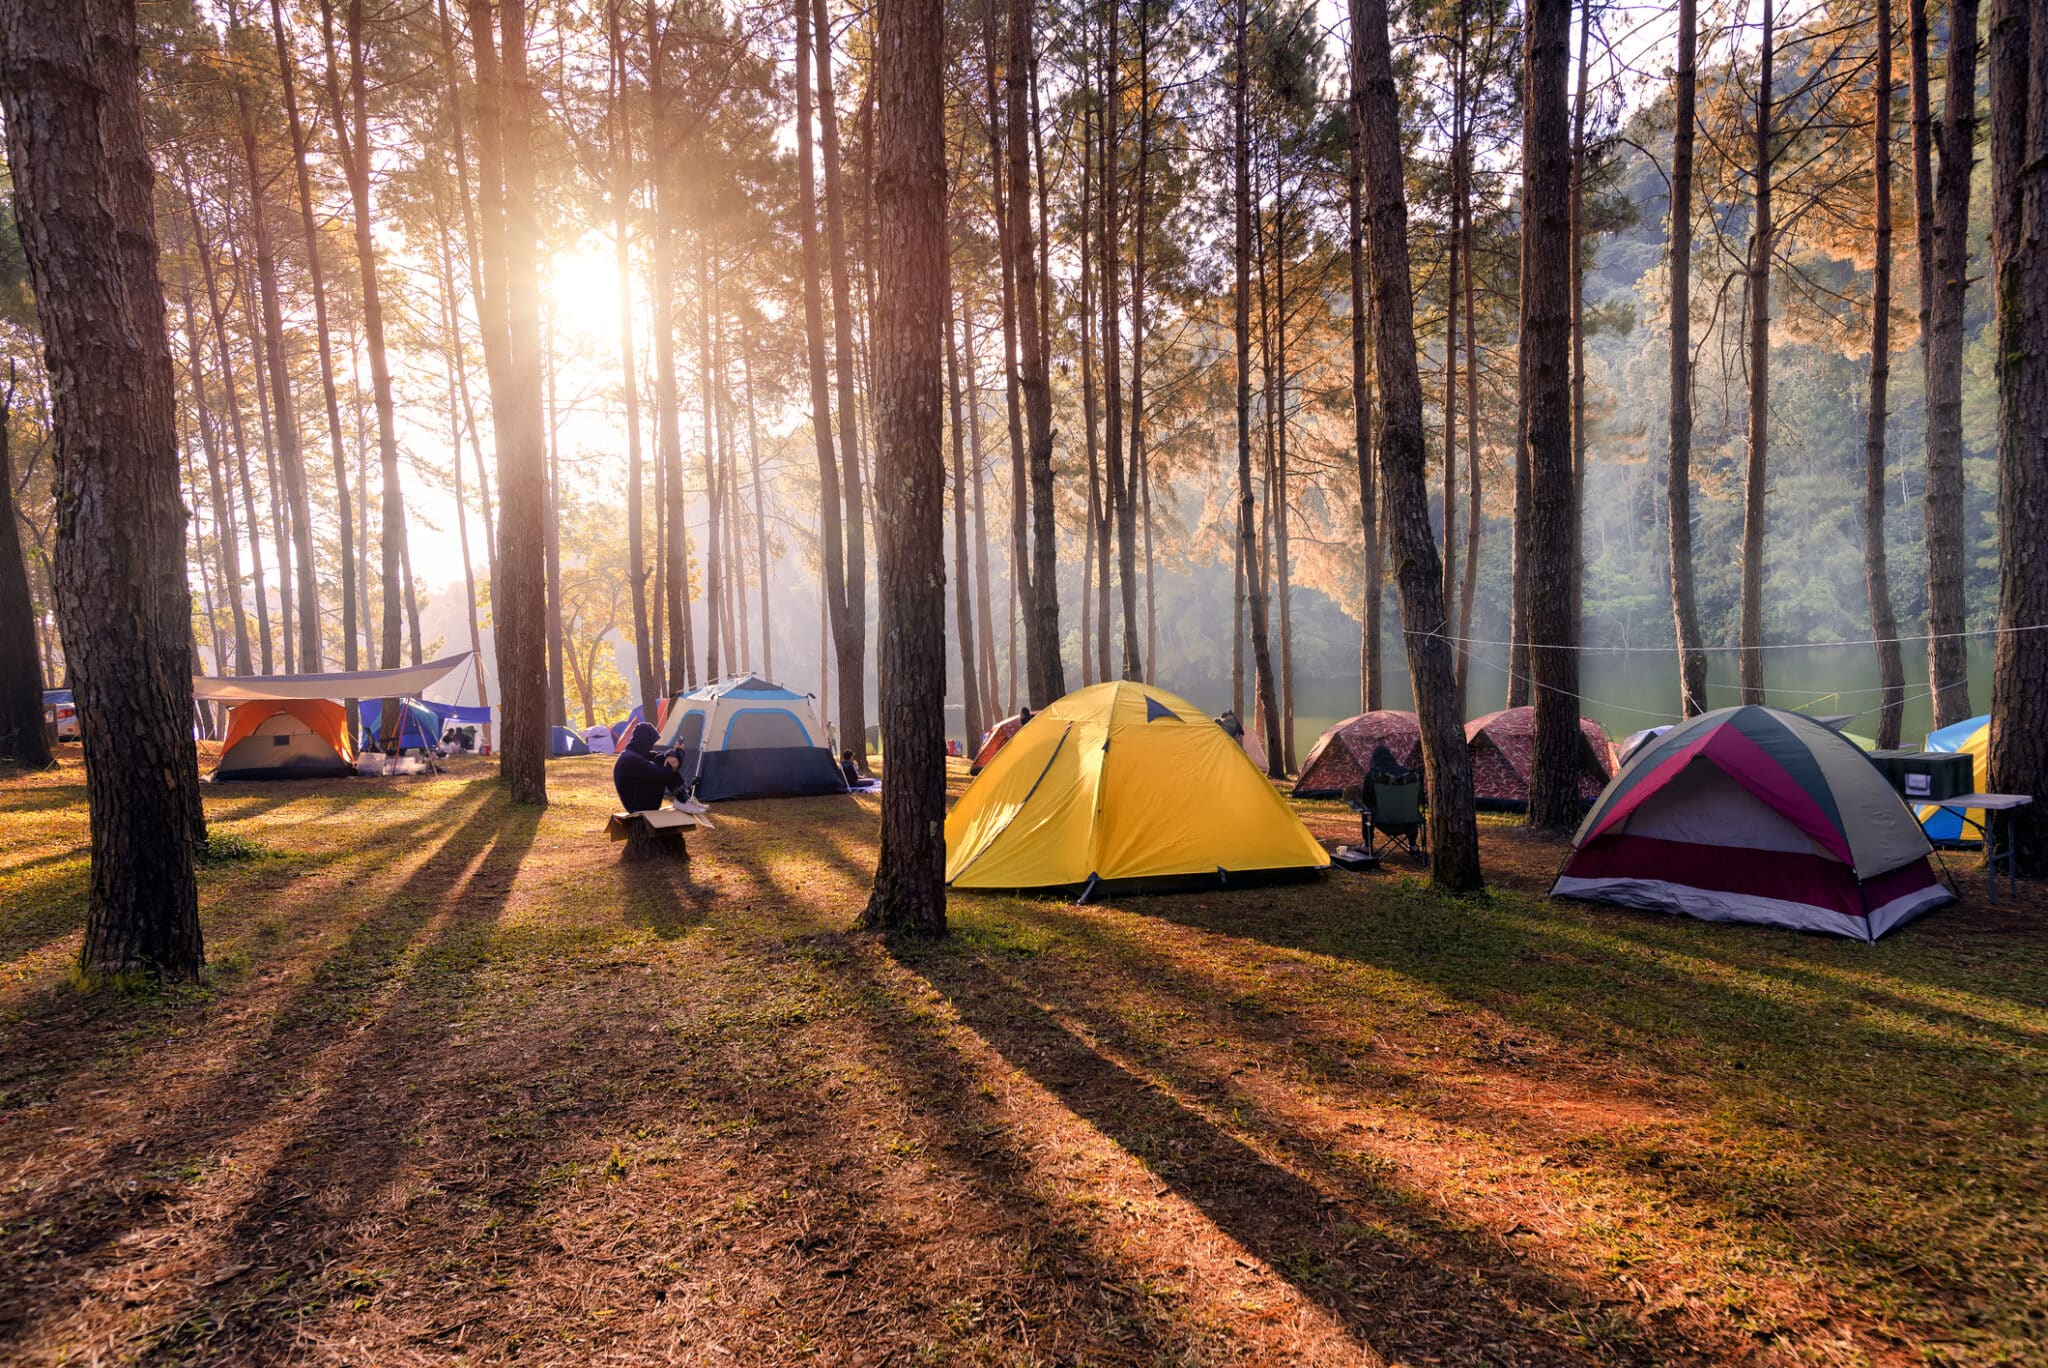 Camping 101: How to Gear Up for a Summer Outdoors